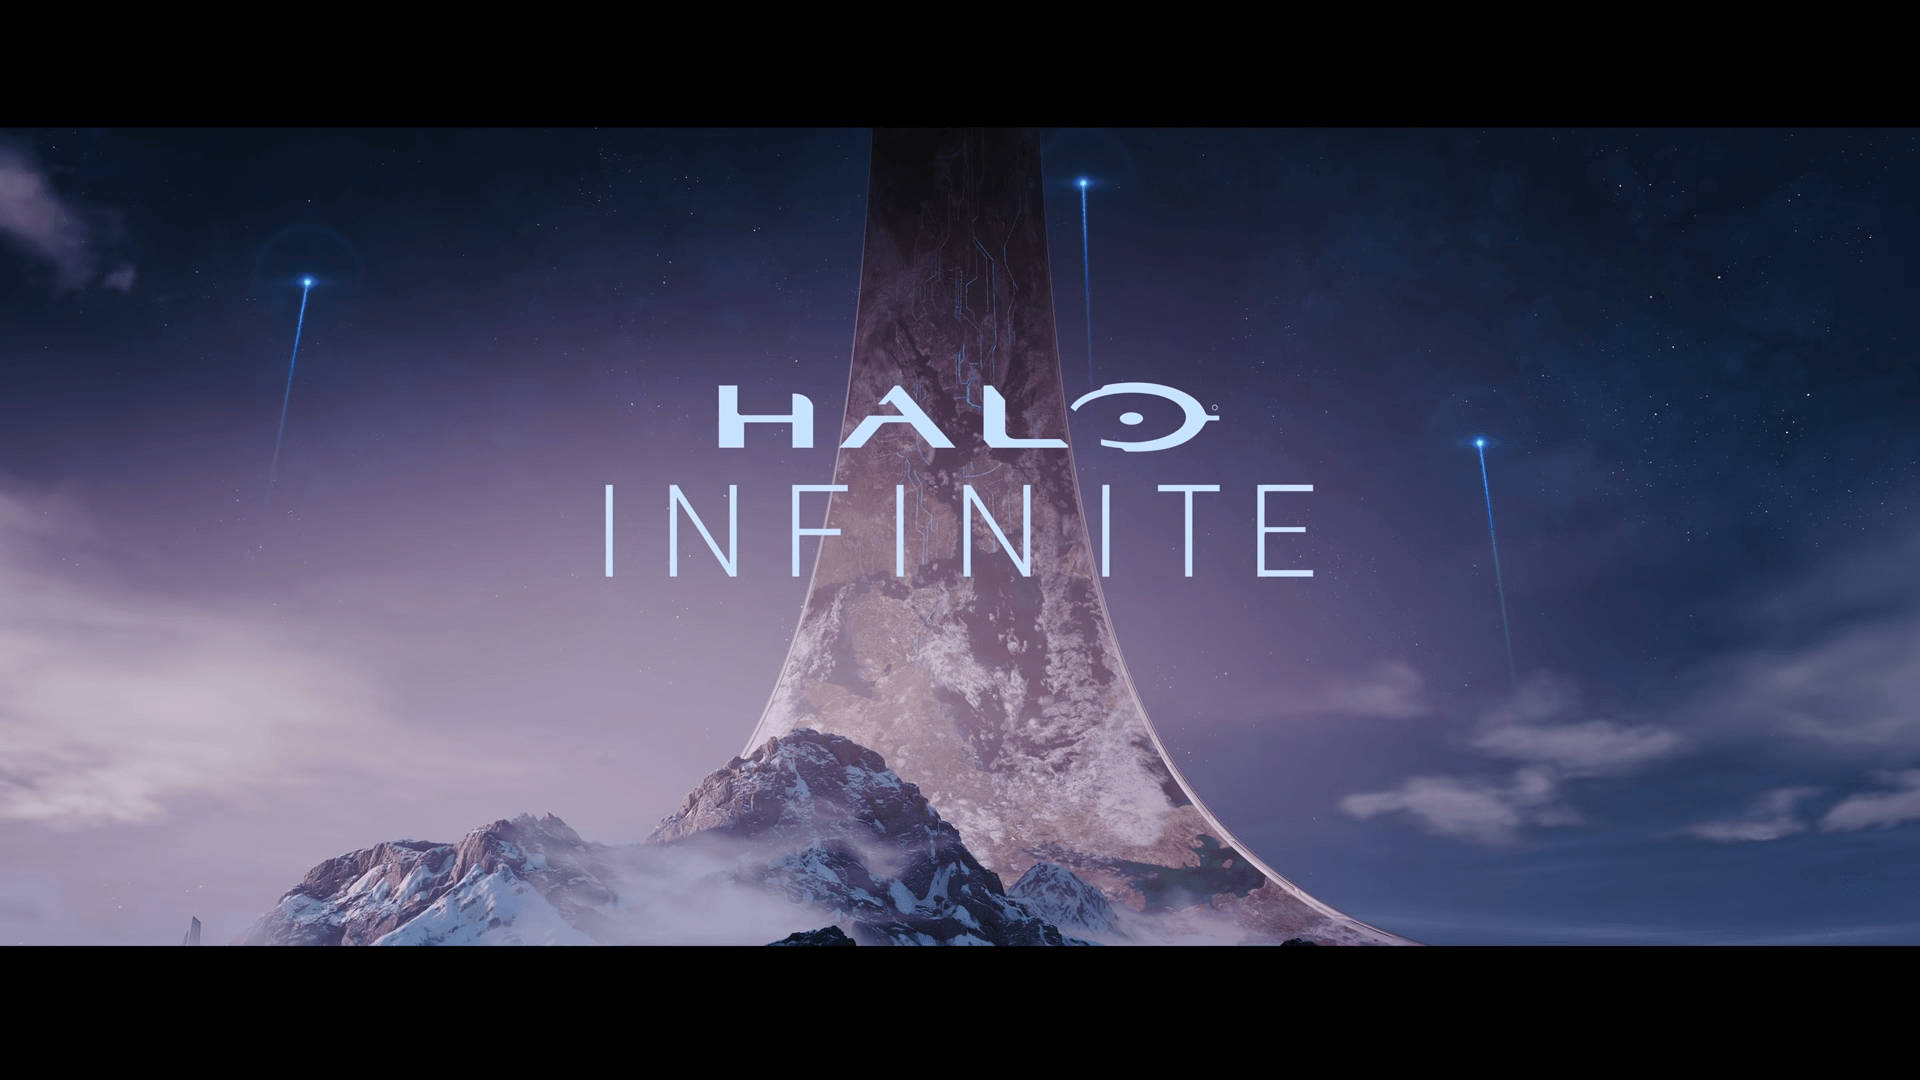 Halo Infinite Spaceships In Sky Background